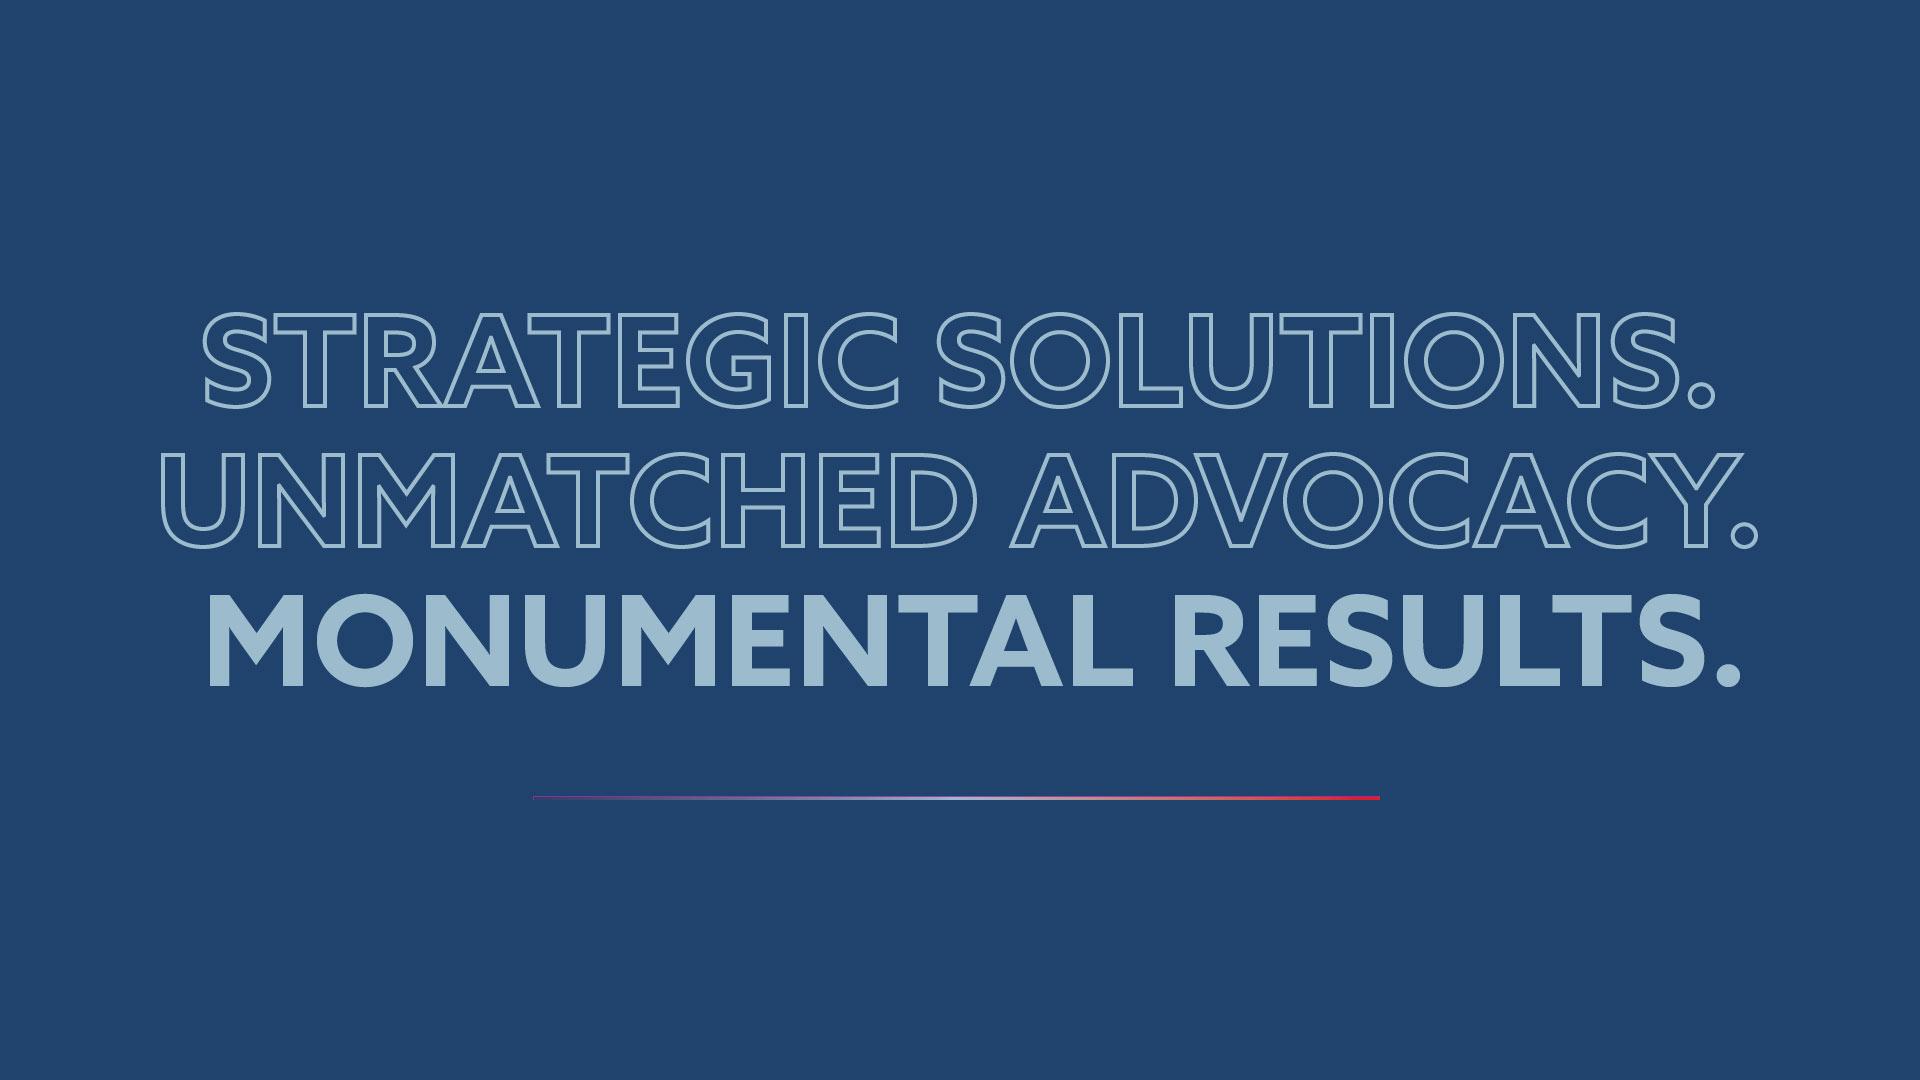 Strategic Solutions. Unmatched Advocacy. Monumental Results.